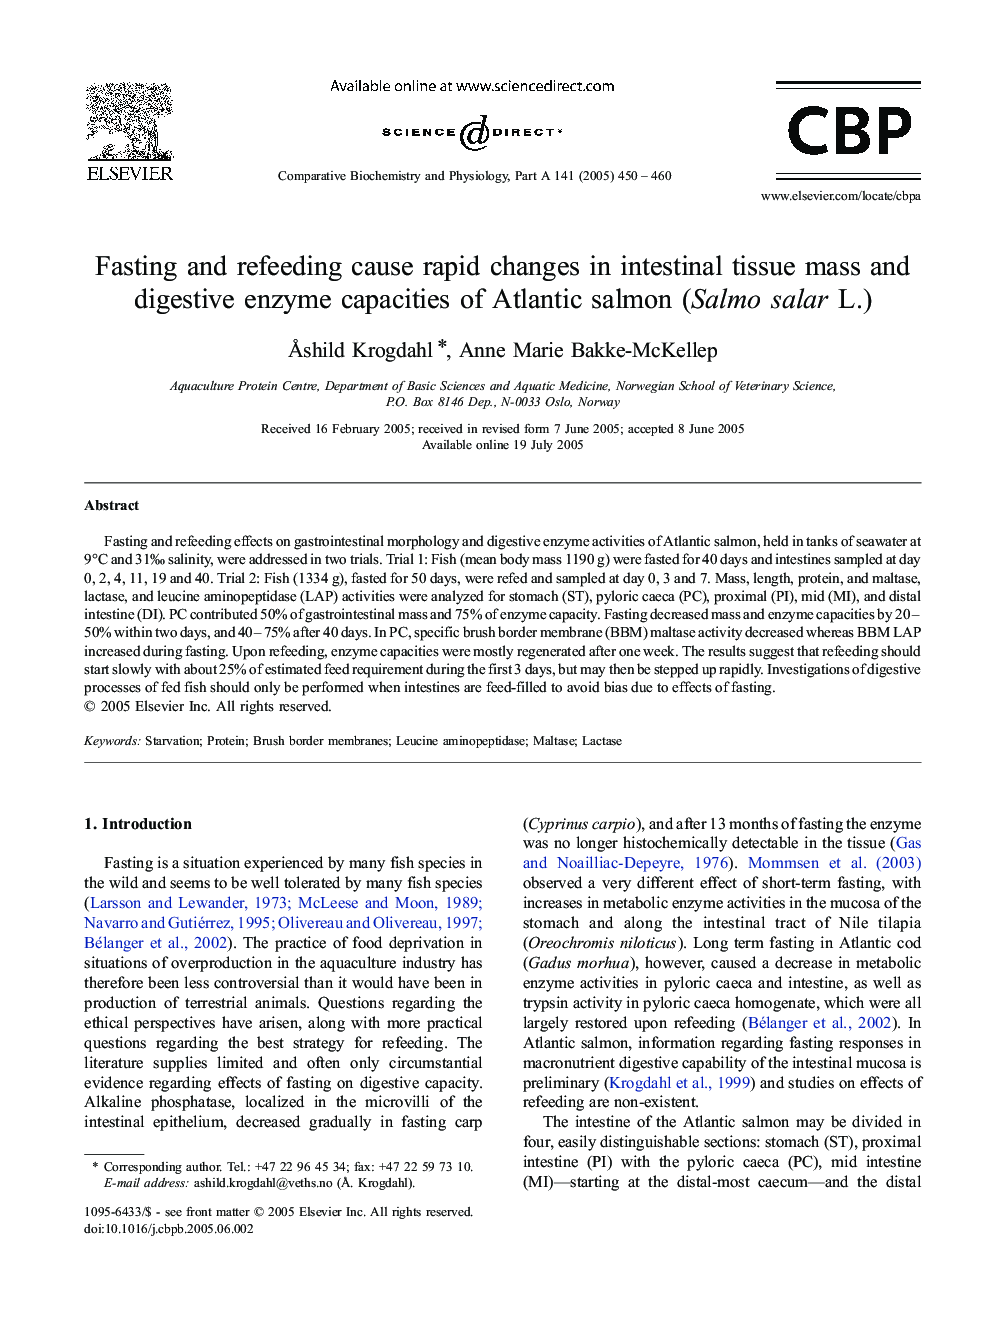 Fasting and refeeding cause rapid changes in intestinal tissue mass and digestive enzyme capacities of Atlantic salmon (Salmo salar L.)